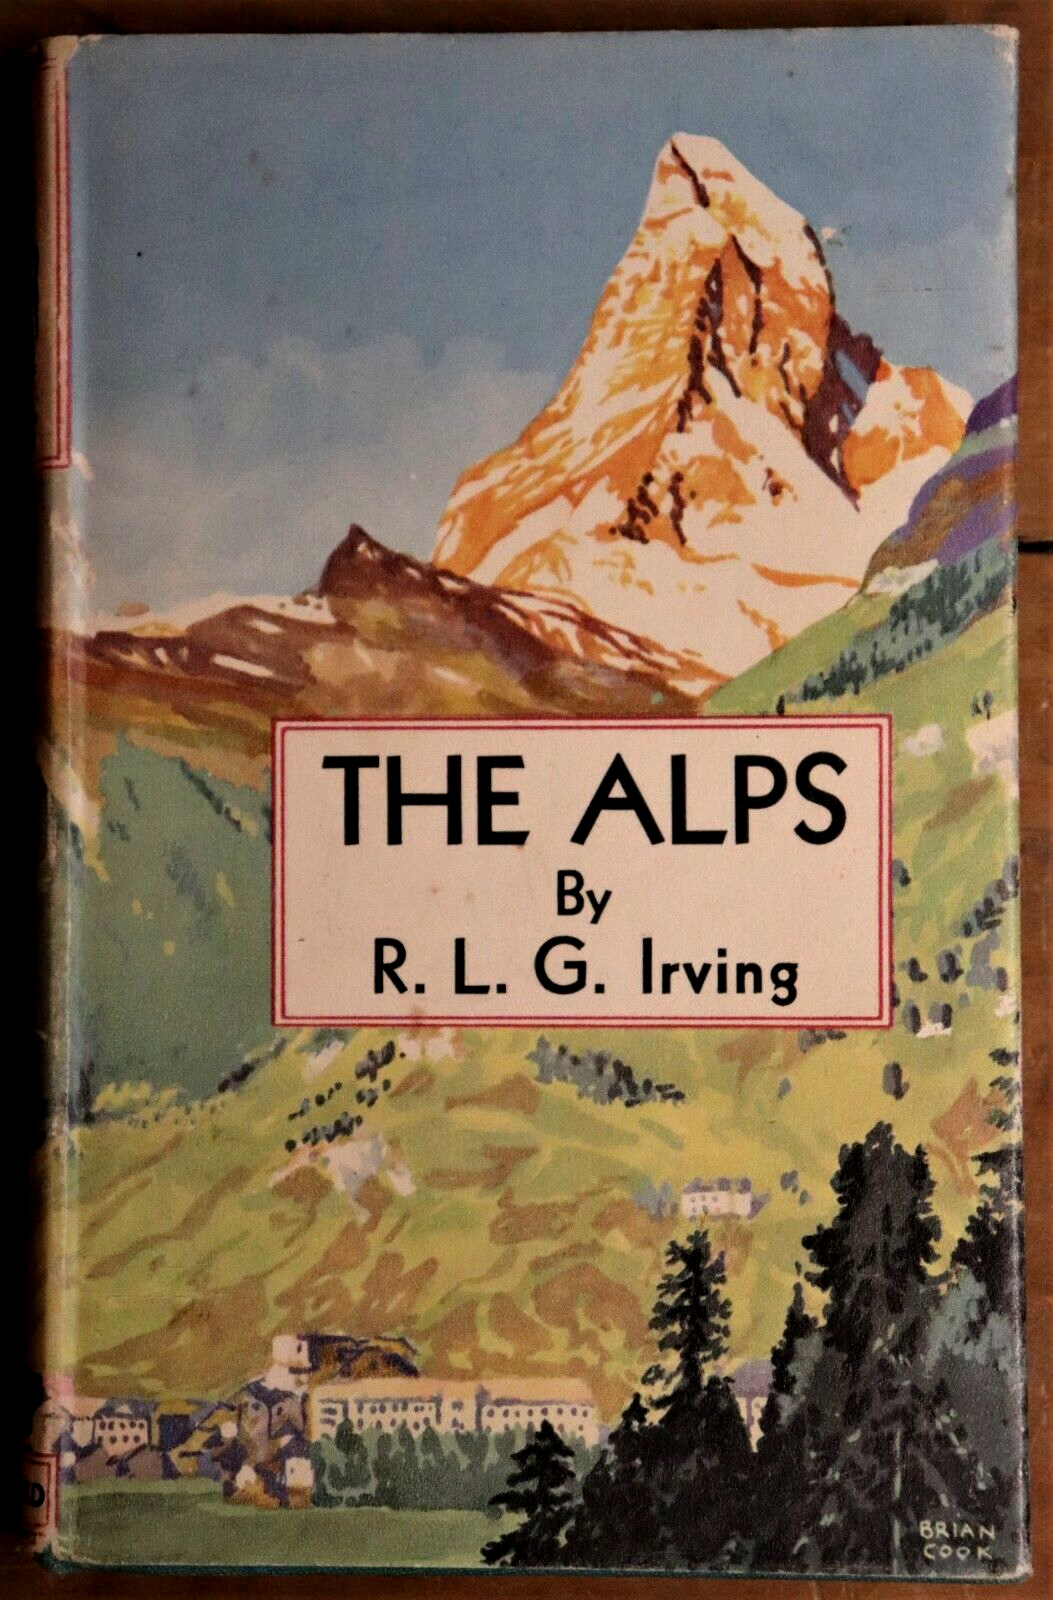 The Alps - R.L.G Irving - 1947 - Rare Antique Travel Book - Mountaineering